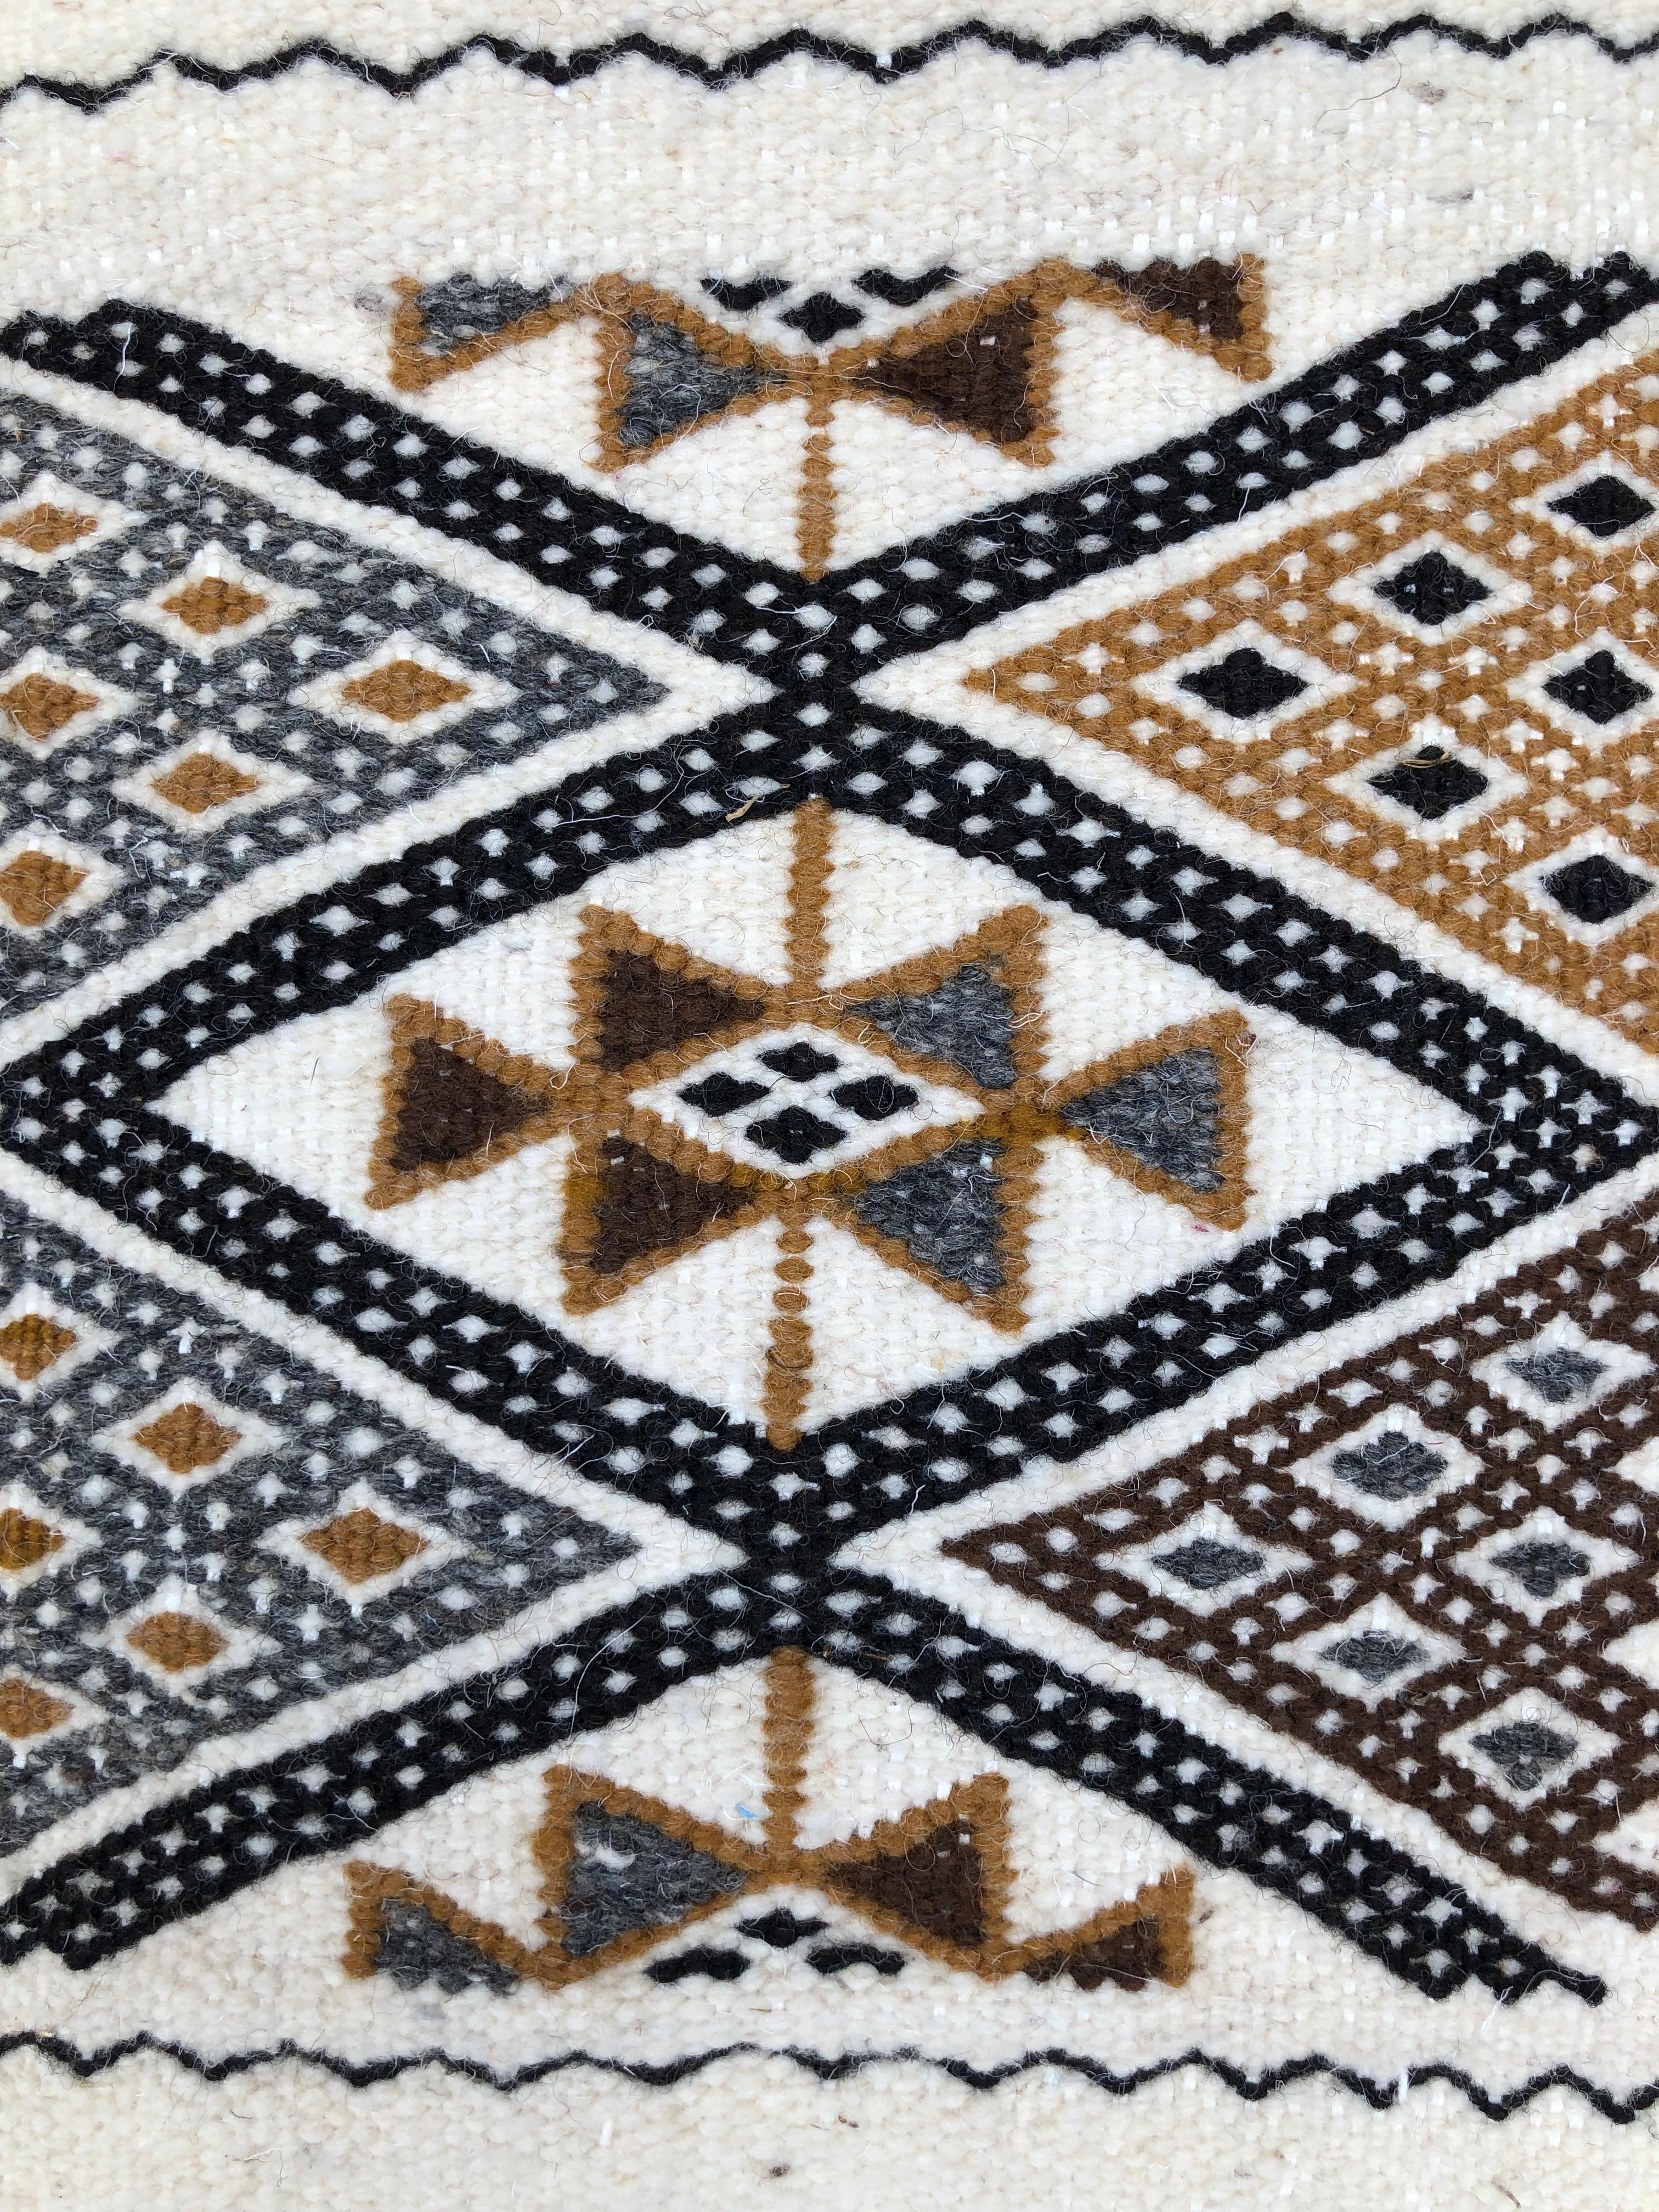 This Berber rug is hand-loomed from 100% sheep's wool and pearl cotton fibers. Berber use them in multi purposes on floor, hang them on wall as art or put on sofa.

The quality is exceptional -- a super tight weave with expertly executed